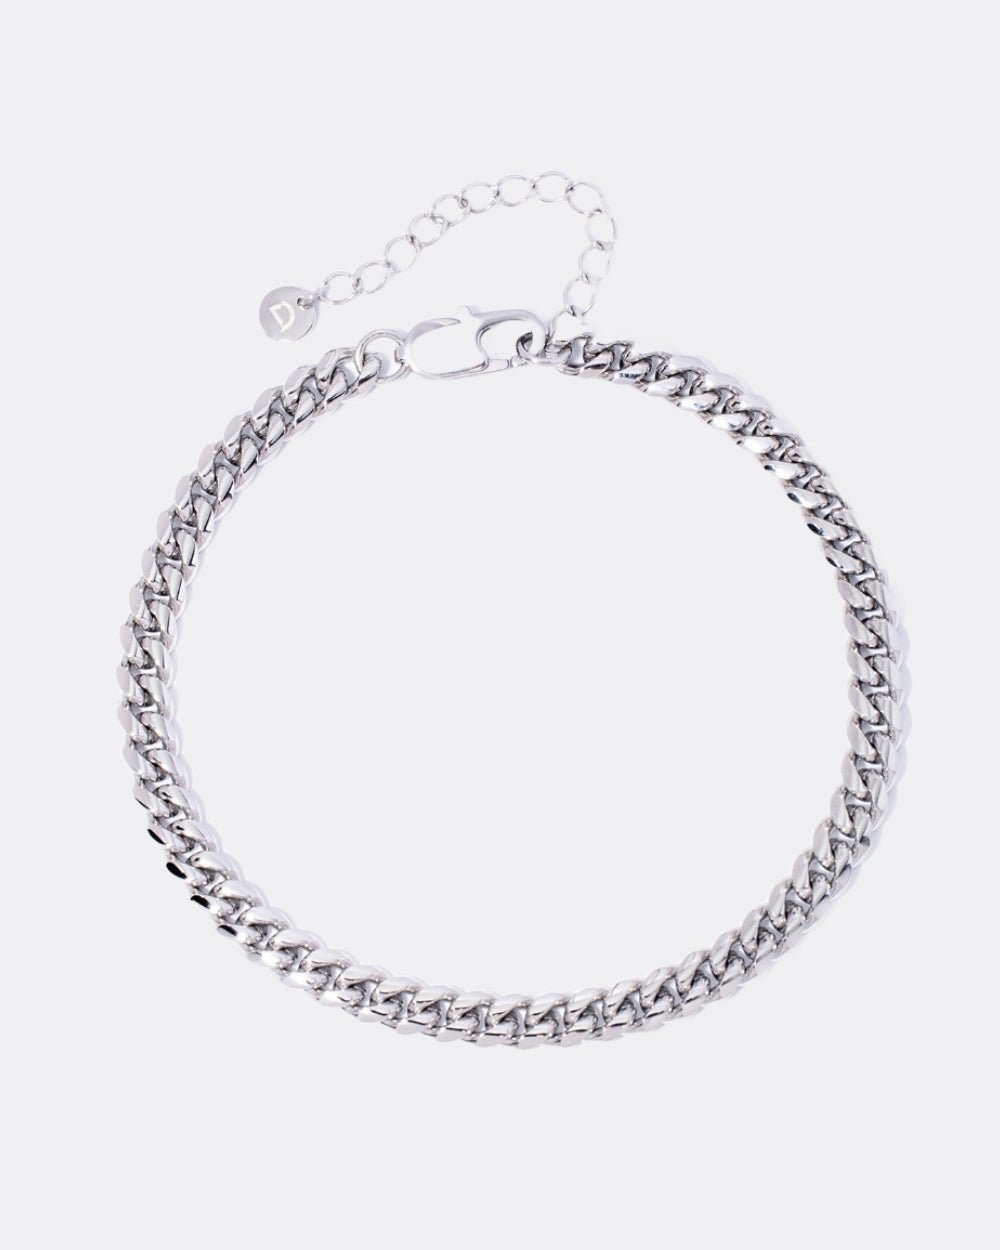 CLEAN CUBAN ANKLET. - 6MM WHITE GOLD - Drippy Amsterdam